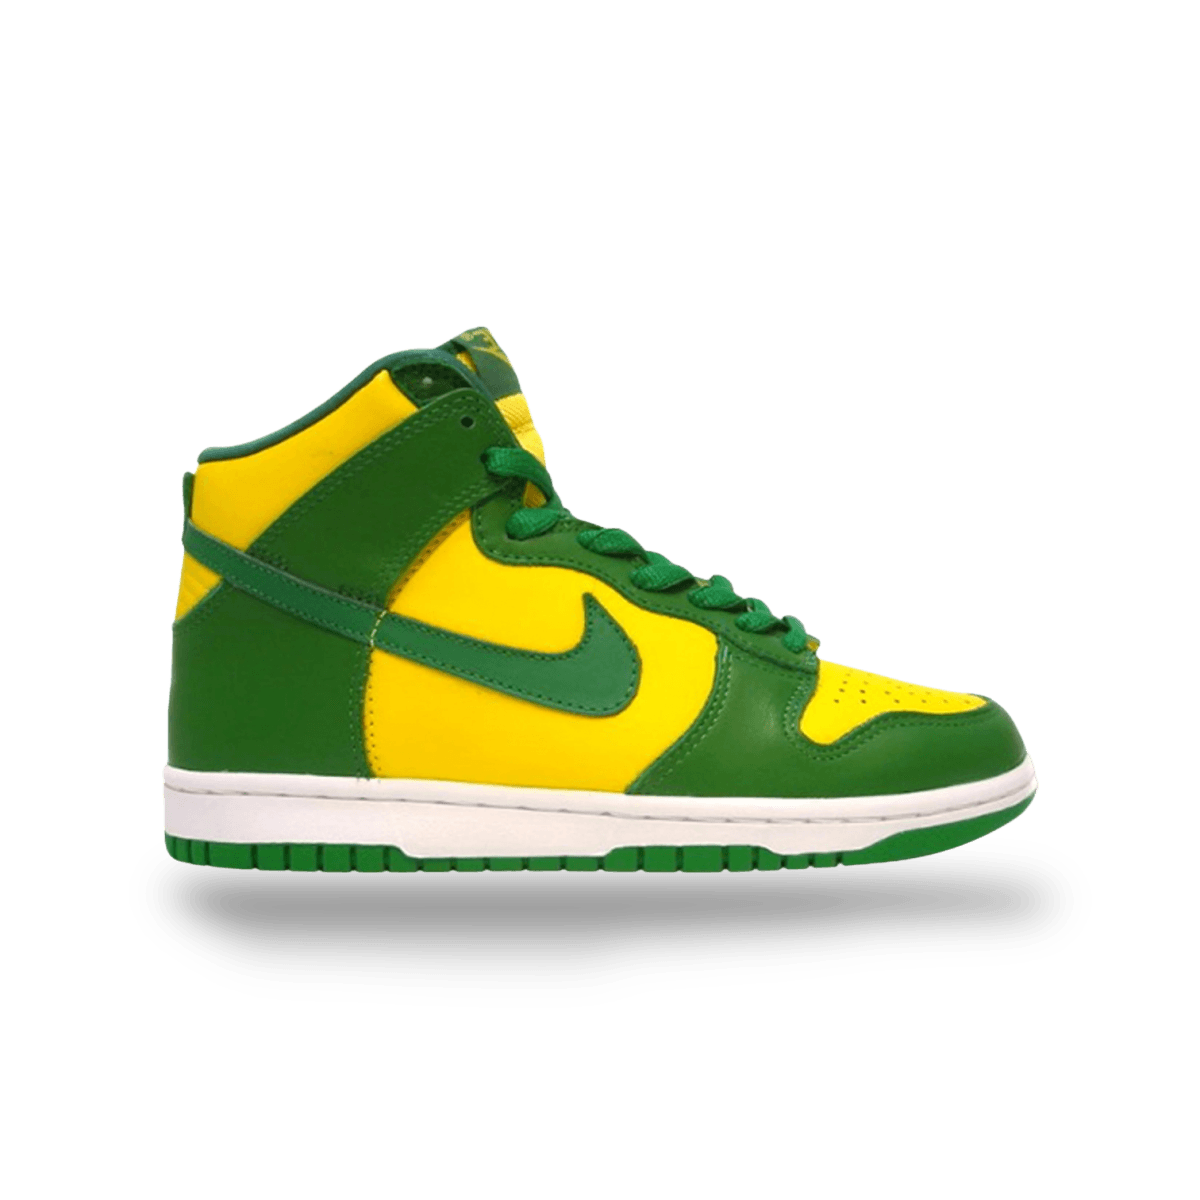 Dunk High Brazil Green & Yellow - Gently Enjoyed (Used) - No Box Men 9.5 - High Sneaker - Dunks - Jawns on Fire